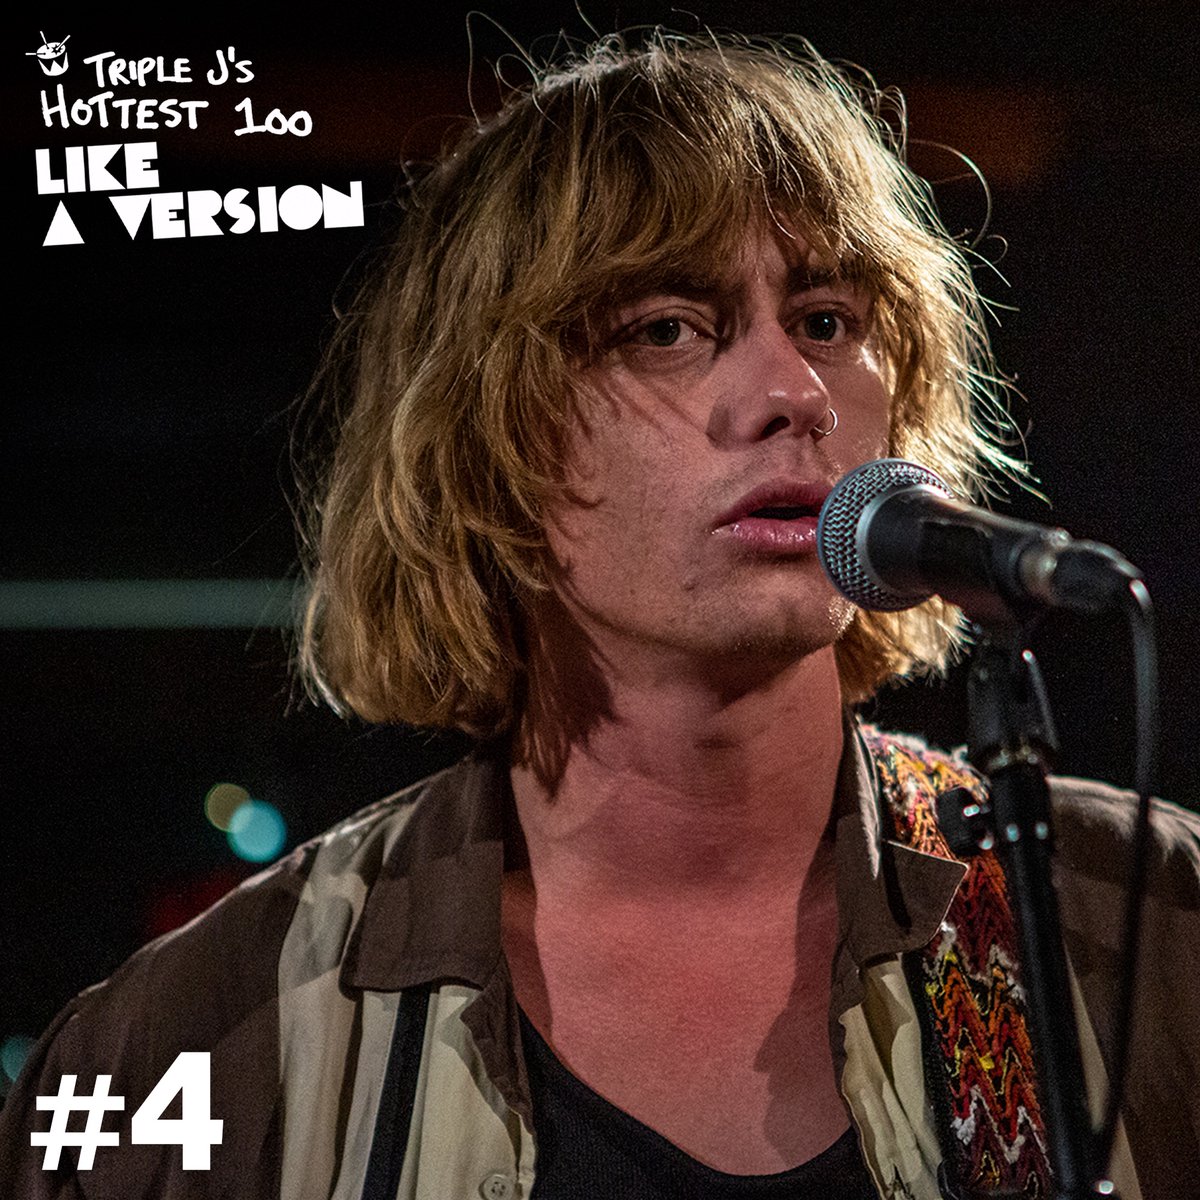 triple j's #Hottest100 of #LikeAVersion #4 @limecordiale - 'I Touch Myself'